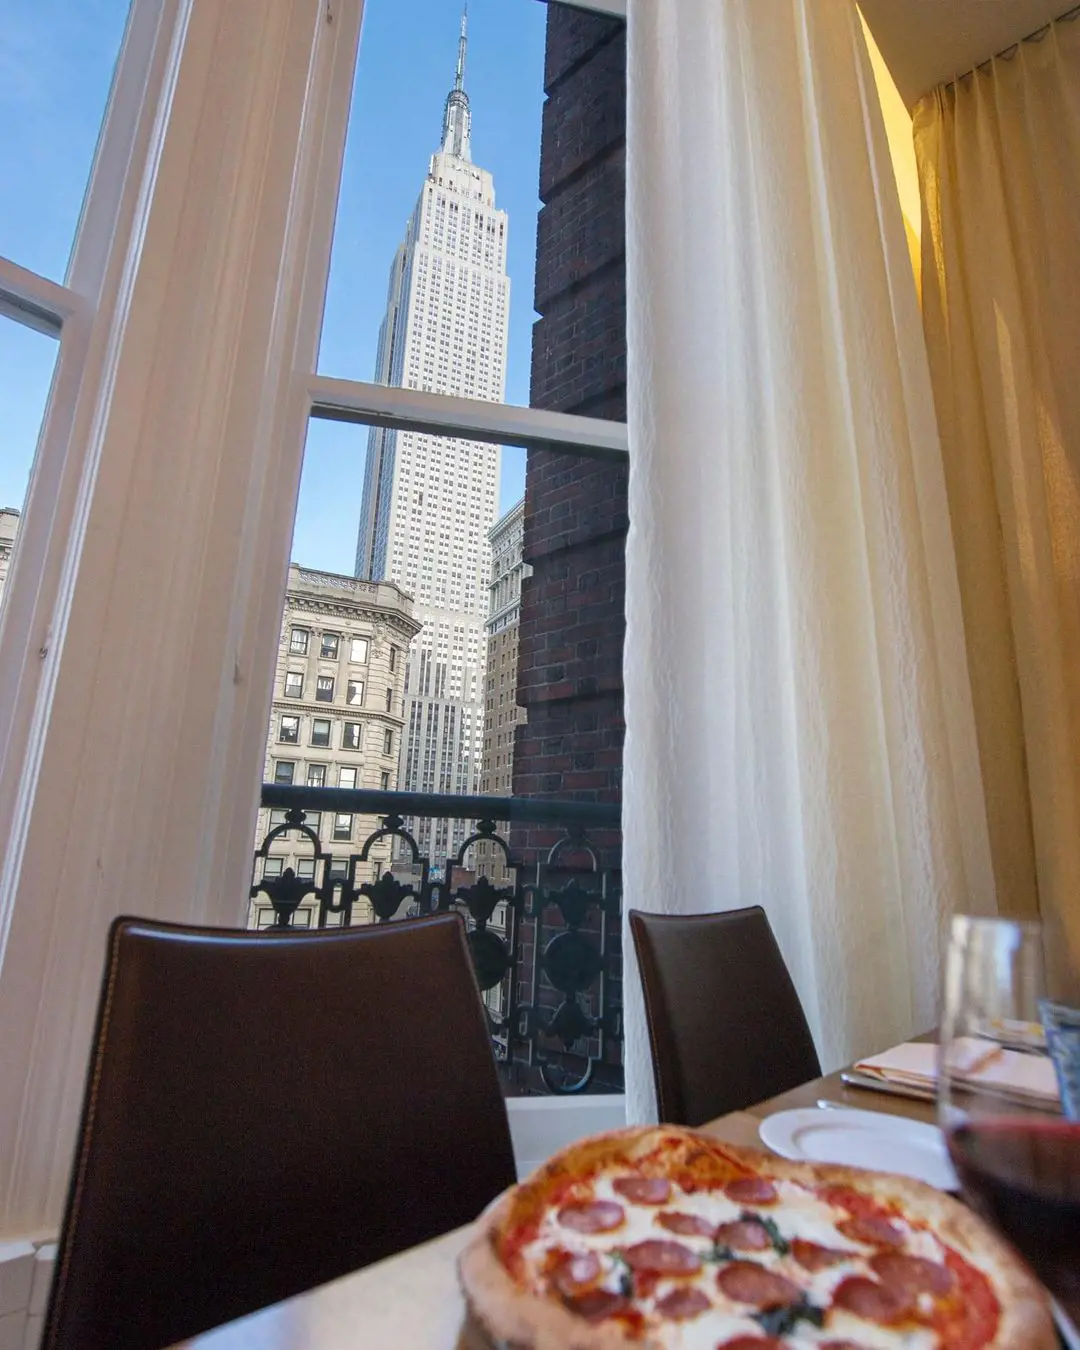 Pizza with a view at Stella 34 Trattoria.